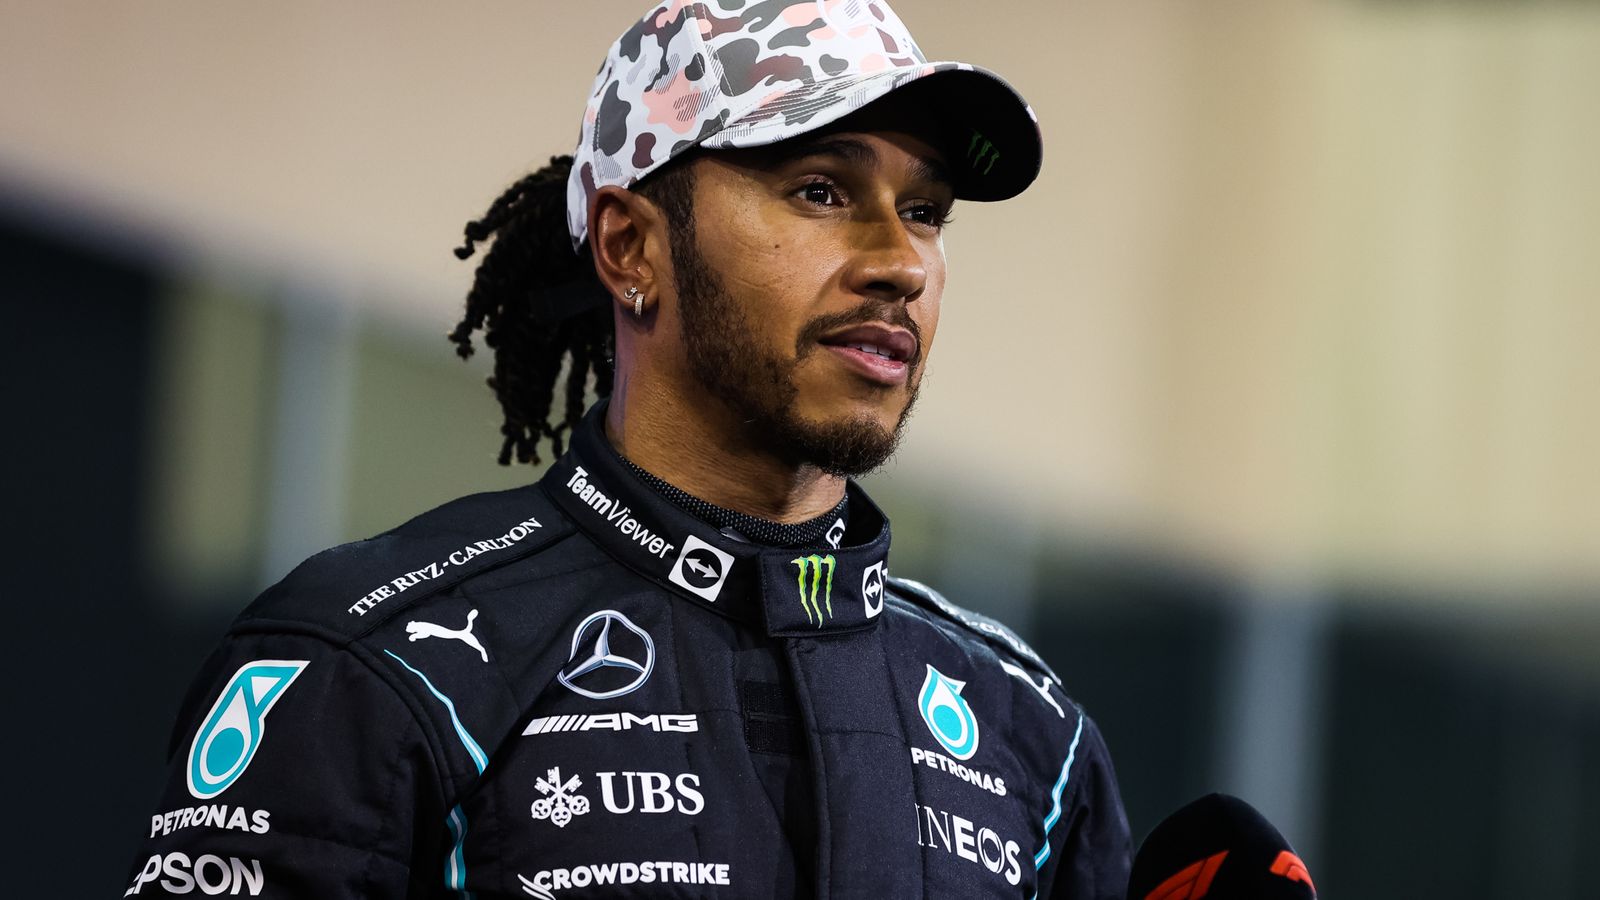 Signatures for a petition to make Lewis Hamilton 2021 champion get to 40,000